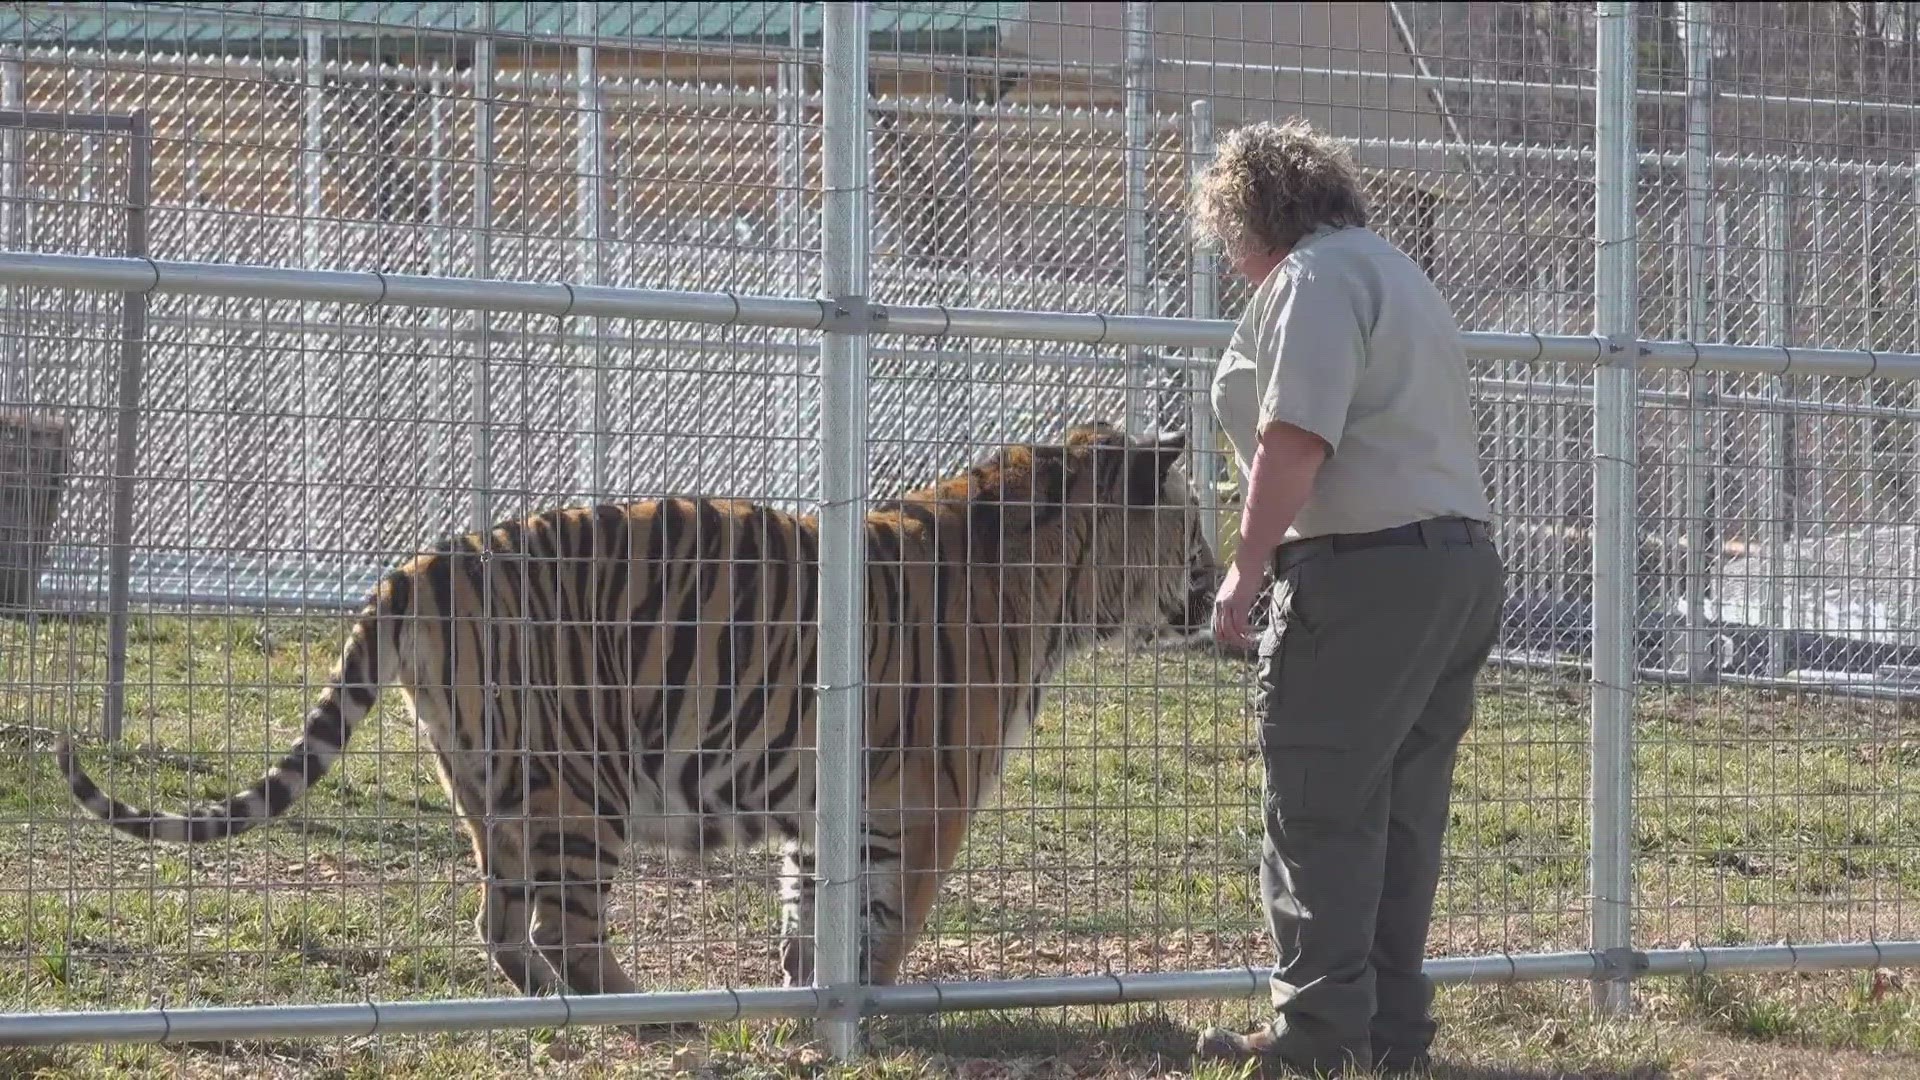 FOR MORE THAN THIRTY YEARS – THEY HAVE RESCUED BIG CATS NATIONWIDE.
THEY JUST RECENTLY WELCOMED MORE THAN THIRTY CATS FEATURED IN THE NETFLIX SHOW – TIGER KING.